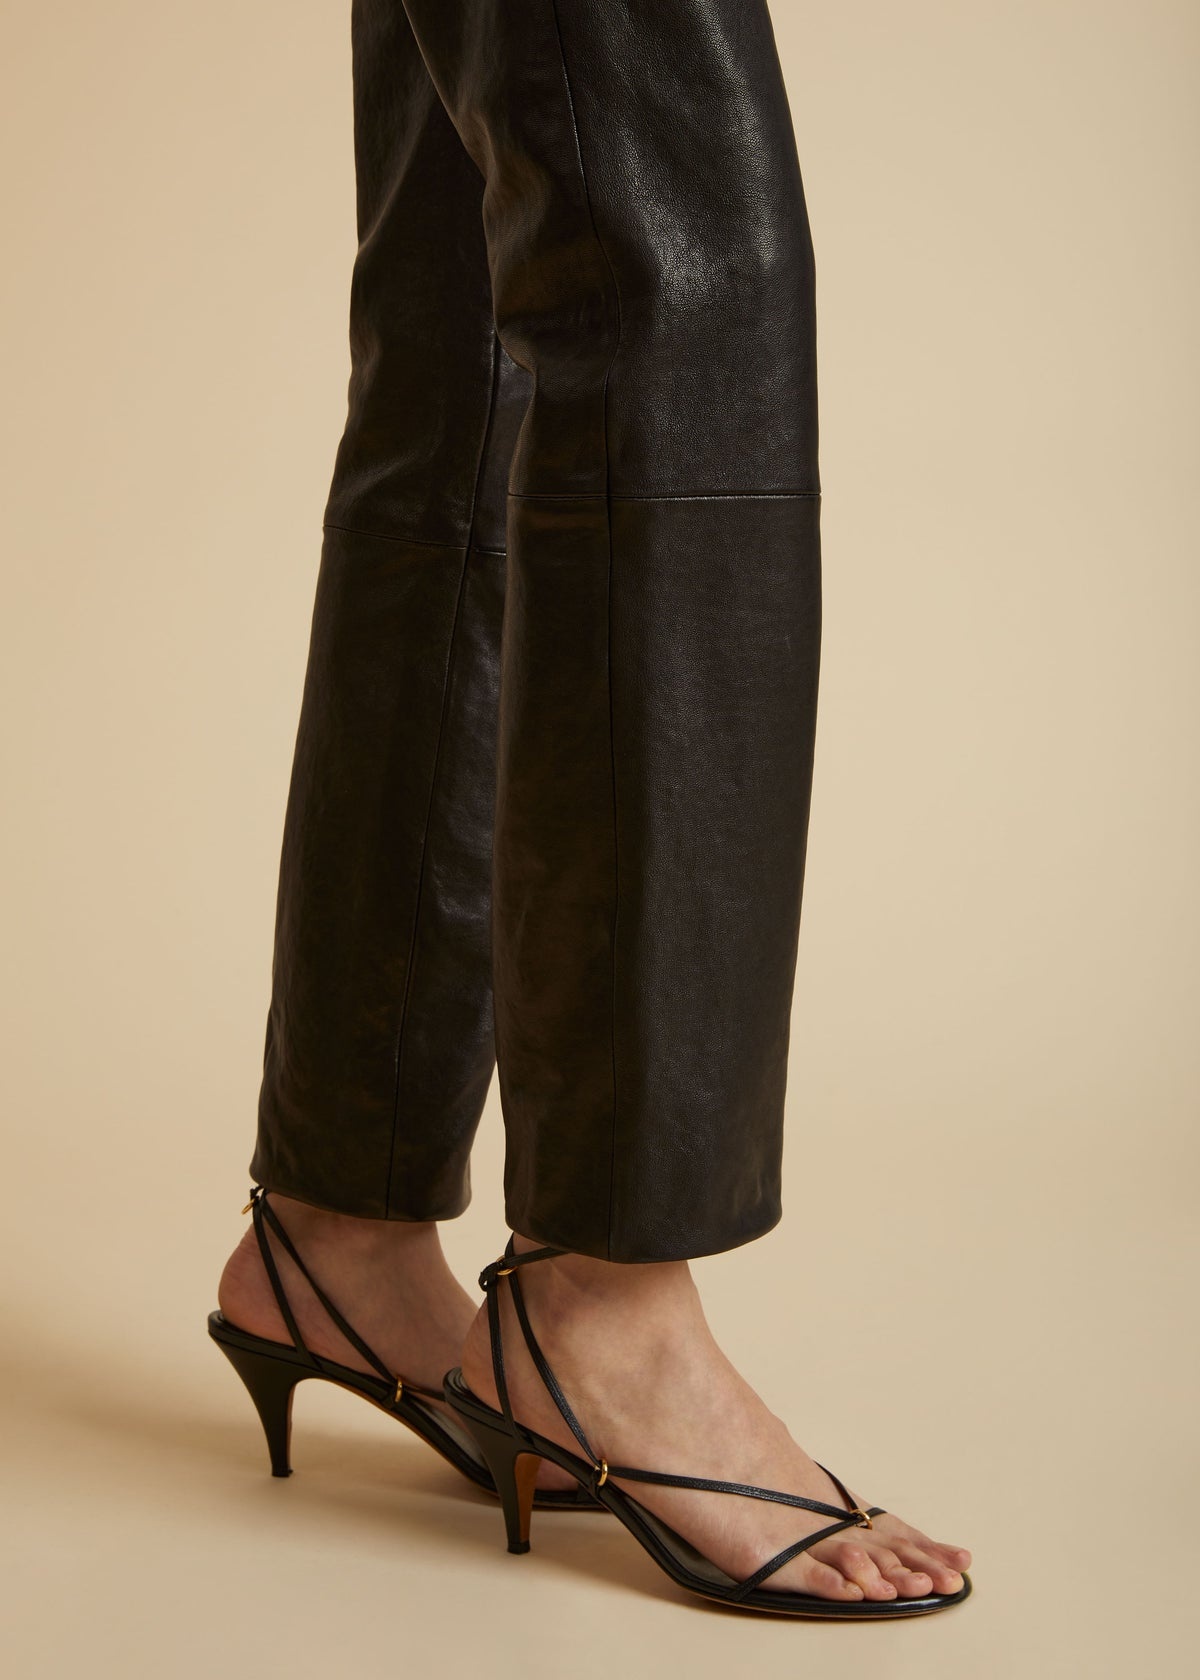 The Emile Pant in Black Leather - 6